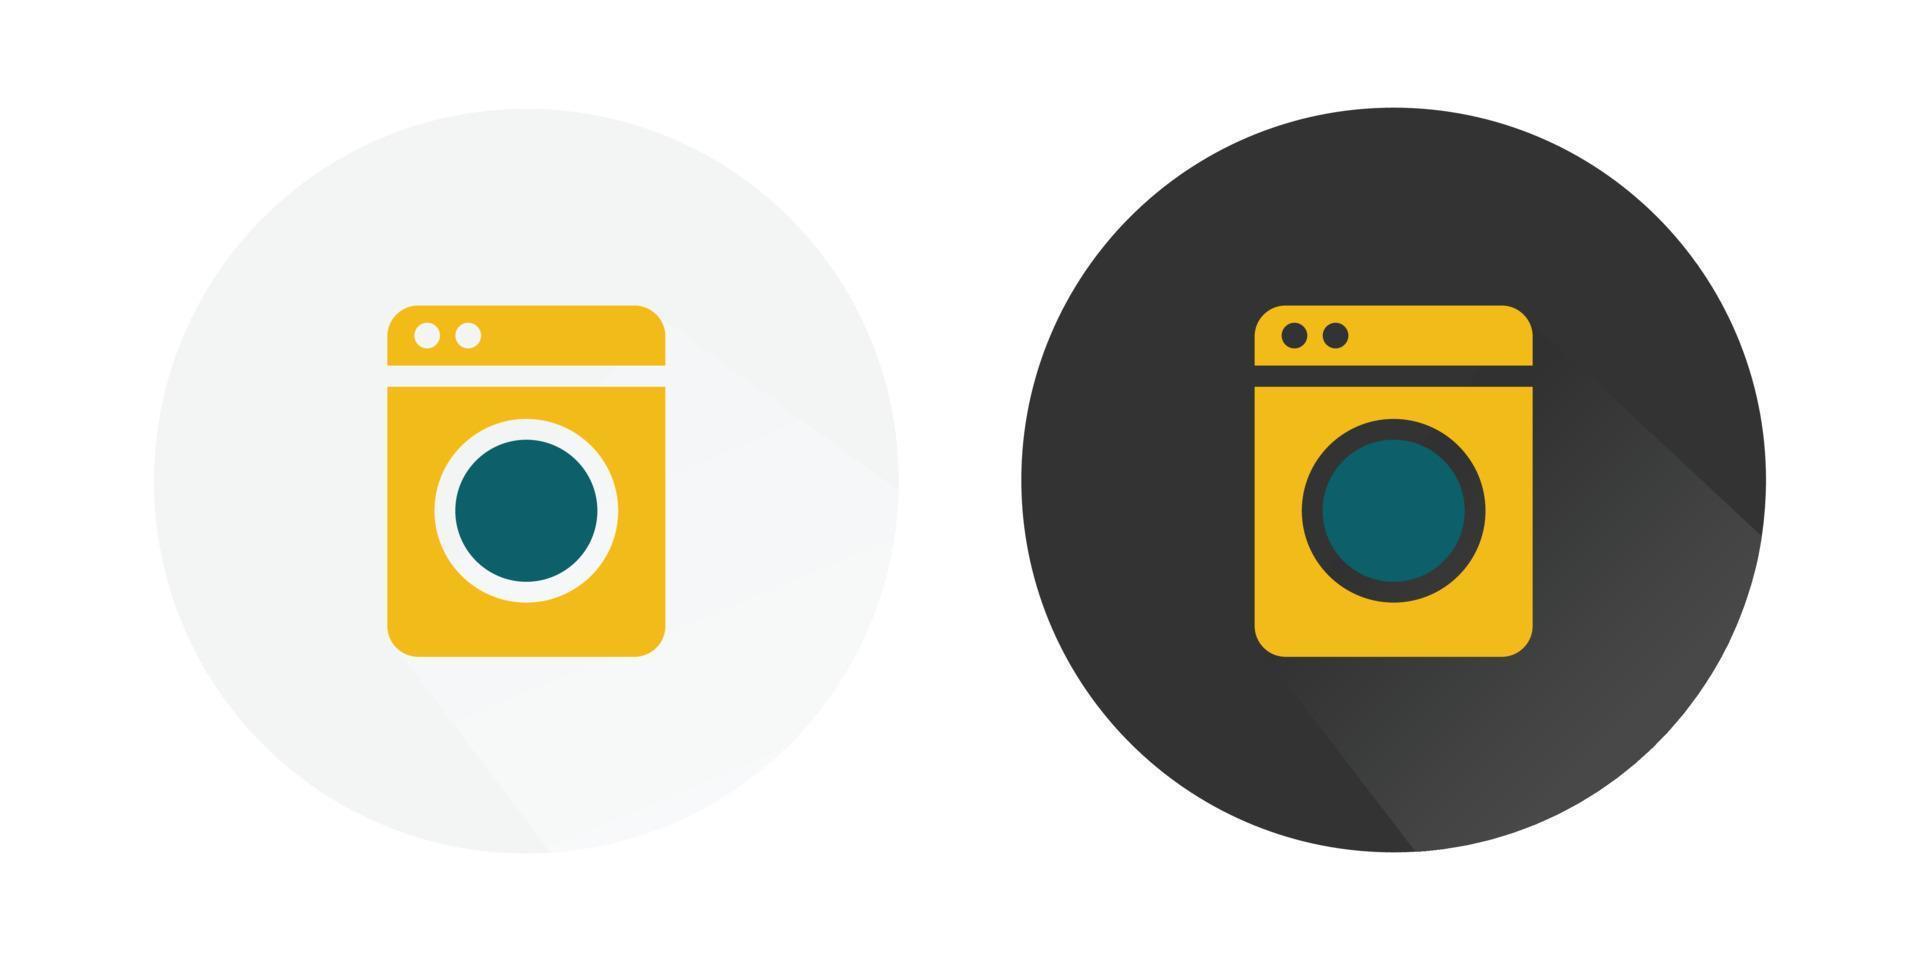 Washing machine icon, Home appliances, Washer, Wash machine, Laundry machine icon, Washing machine logo Colorful vector icons